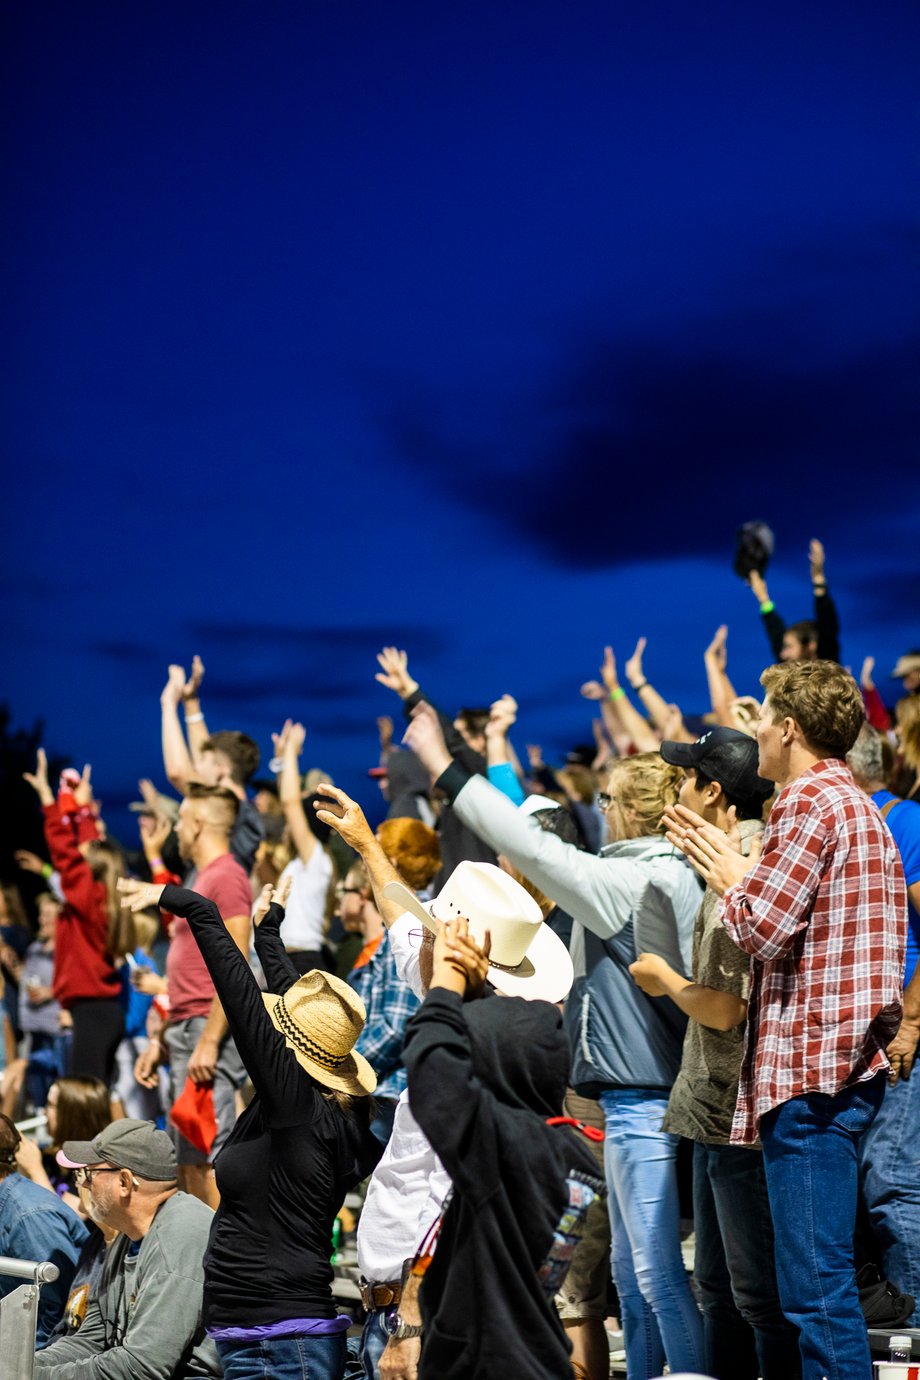 Adam Hester catches the cheering crowd at the rodeo in Jackson Hole